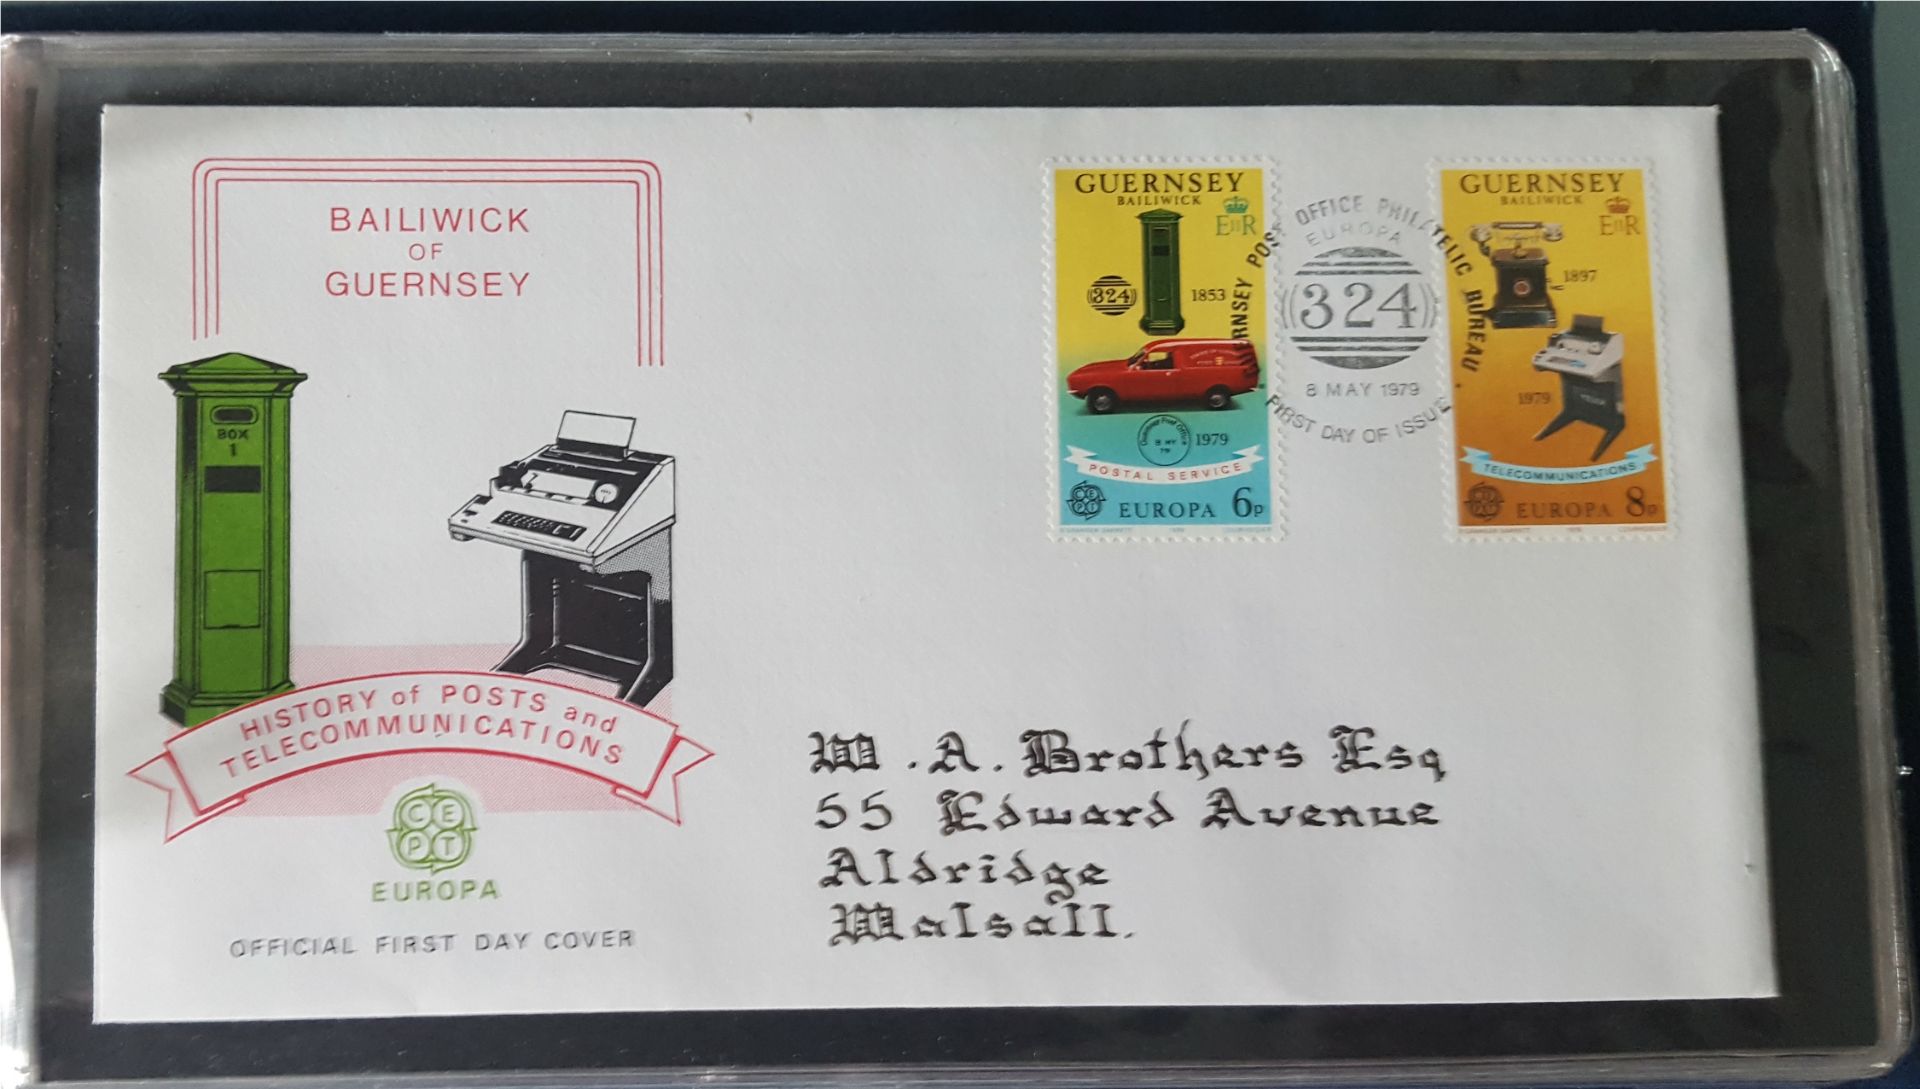 Vintage Retro Collection of First Day Covers Bailiwick of Guernsey 10 FDC's In Folder c1970's - Image 4 of 5